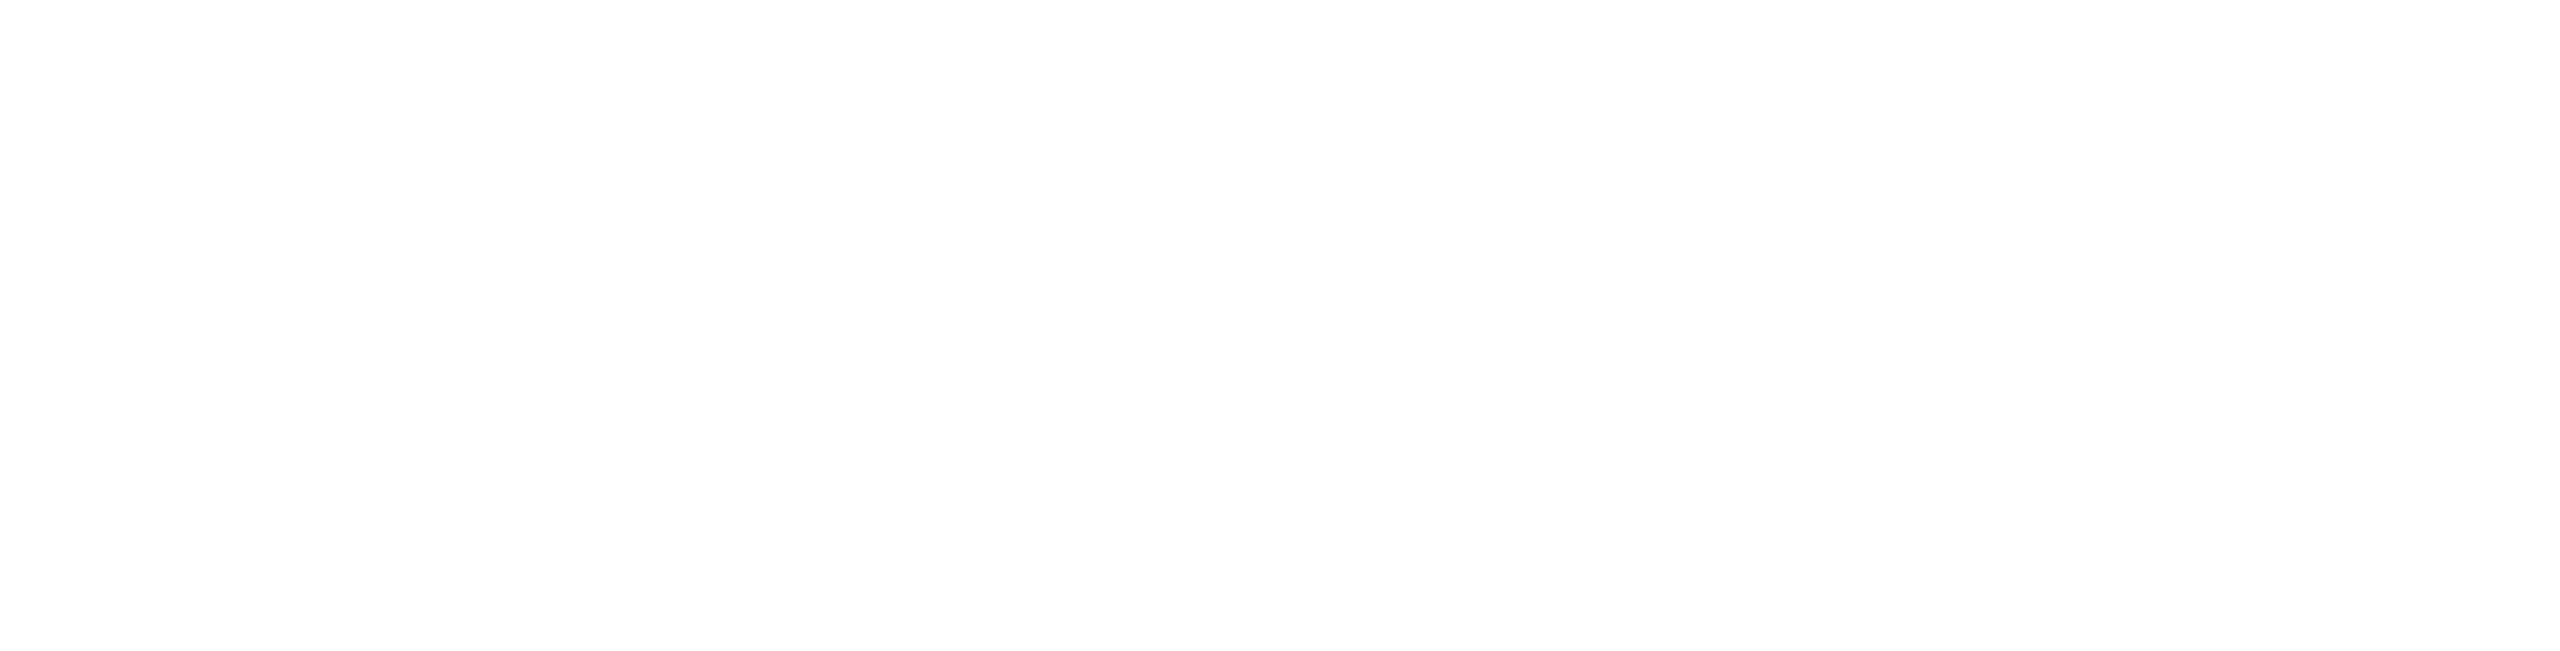 Vineville Townhomes